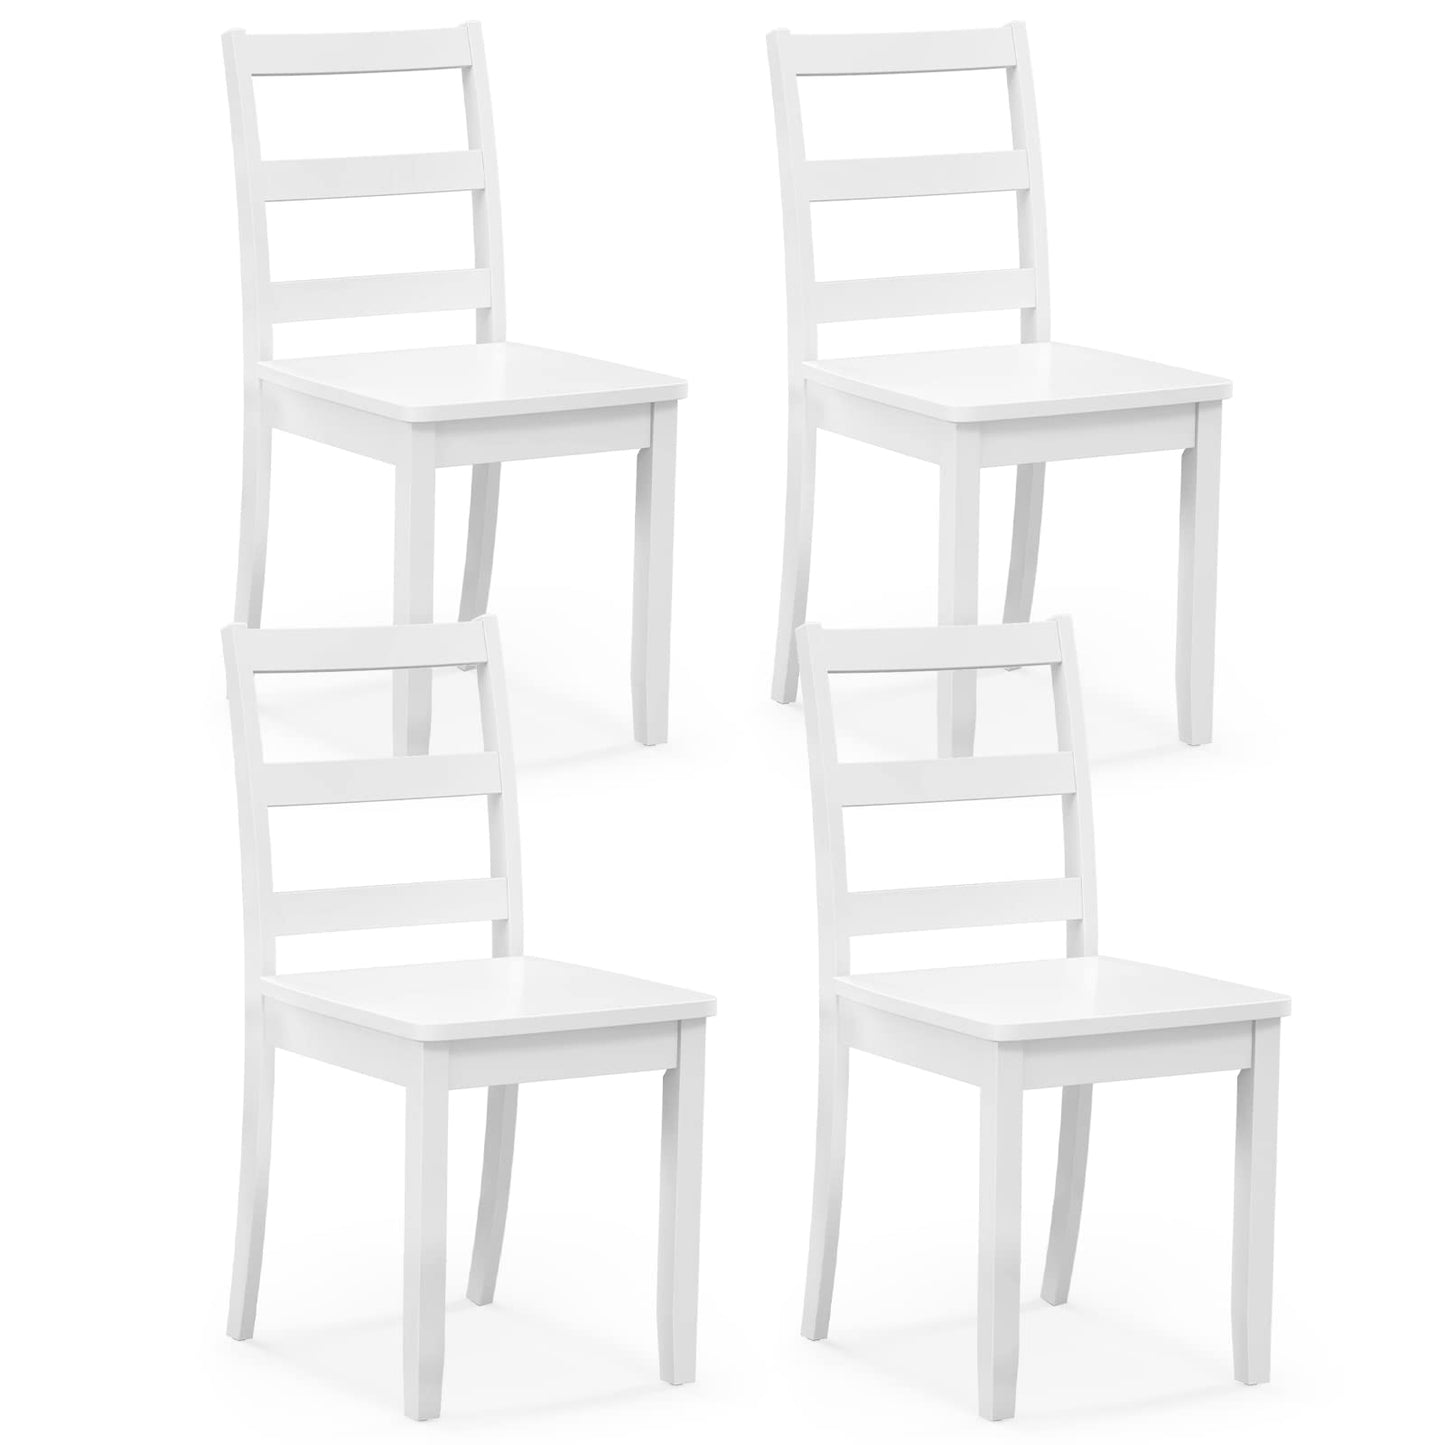 Giantex Wood Dining Chairs Set of 4 White - Wooden Armless Kitchen Chairs with Solid Rubber Wood Legs, Non-Slip Foot Pads, Max Load 400 Lbs,